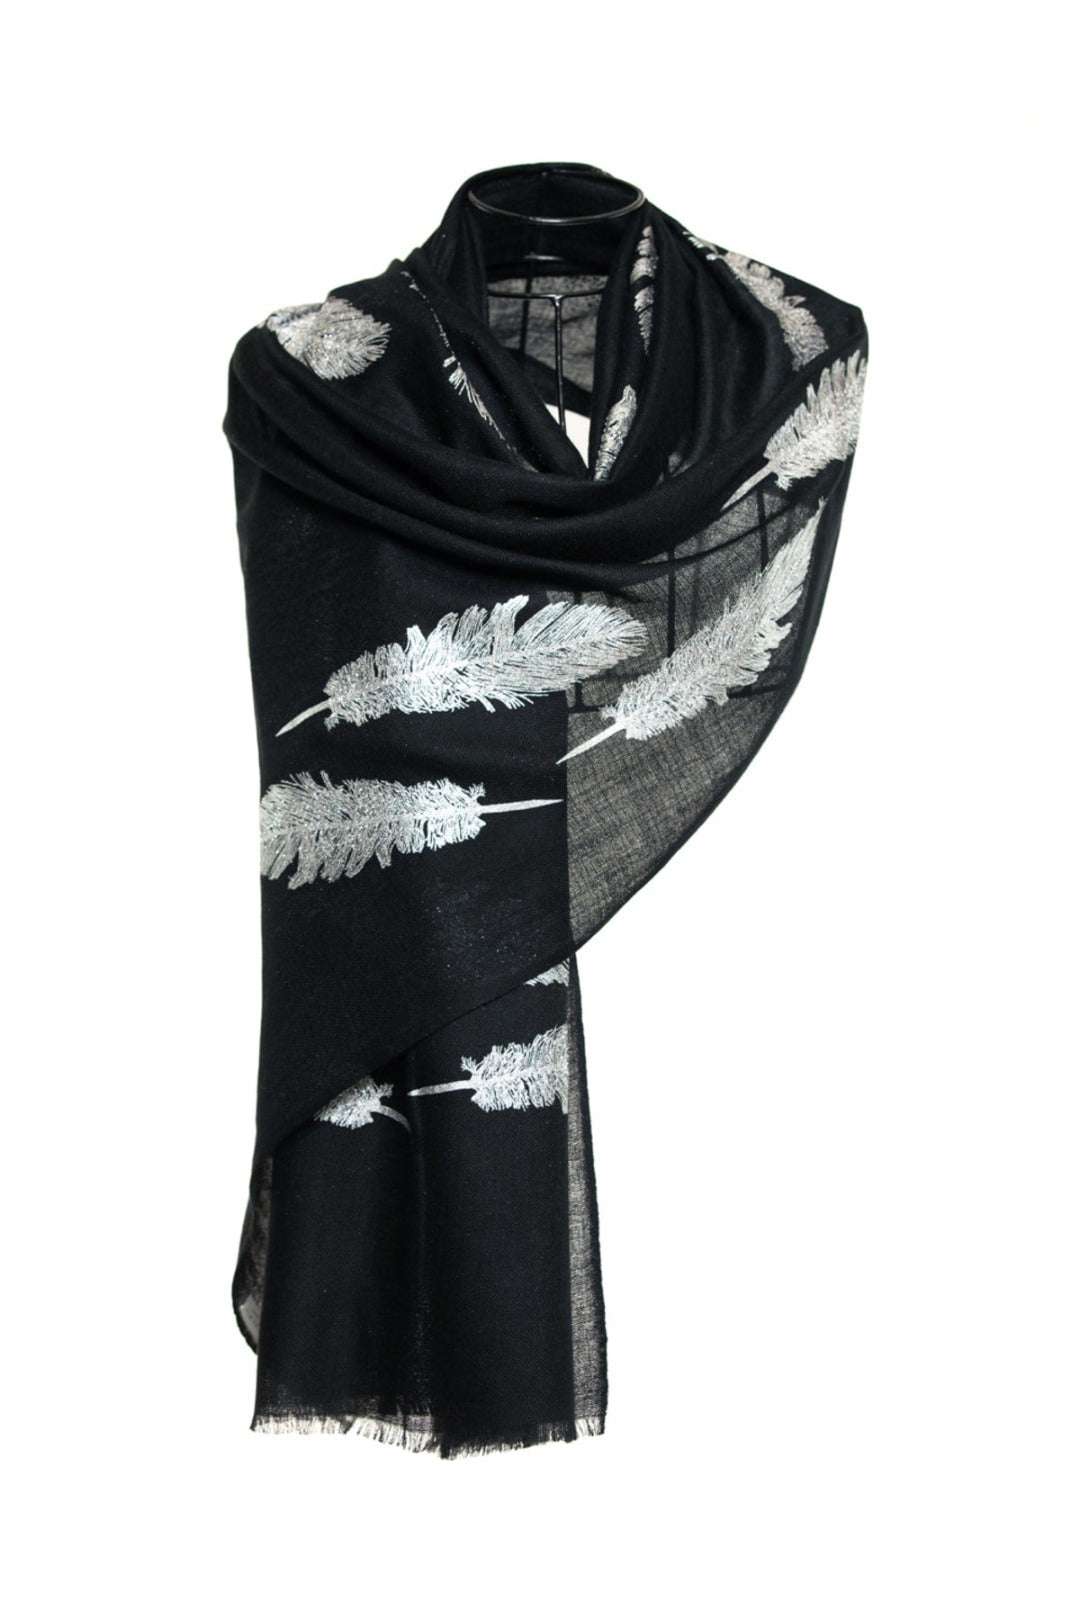 Angel Feathers Crystal Feathers Shawl Stole - Black Silver